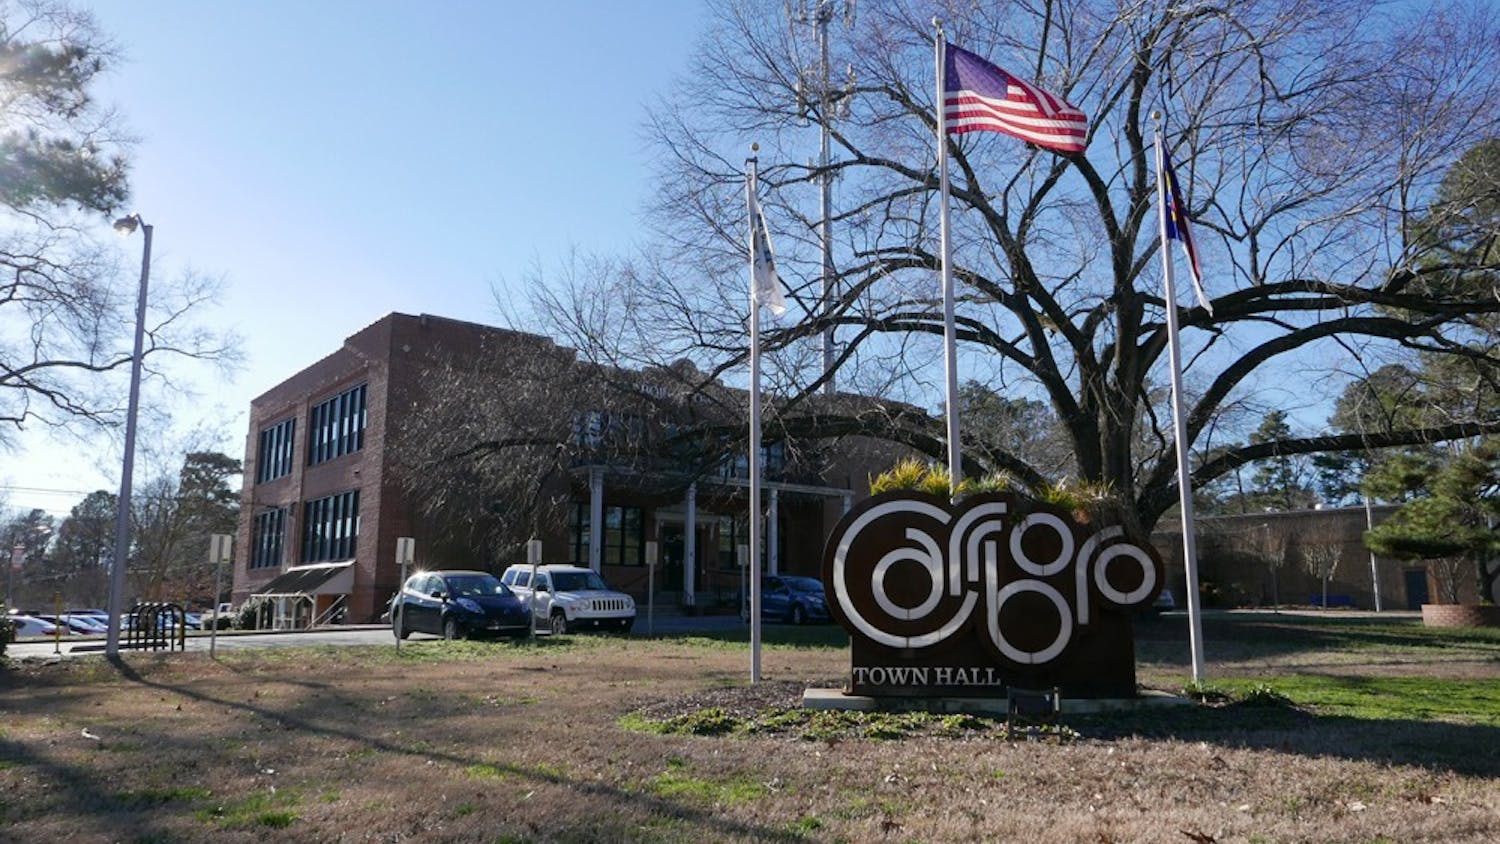 The statewide poll found 61 percent of respondents were unsure of their opinion of Carrboro.